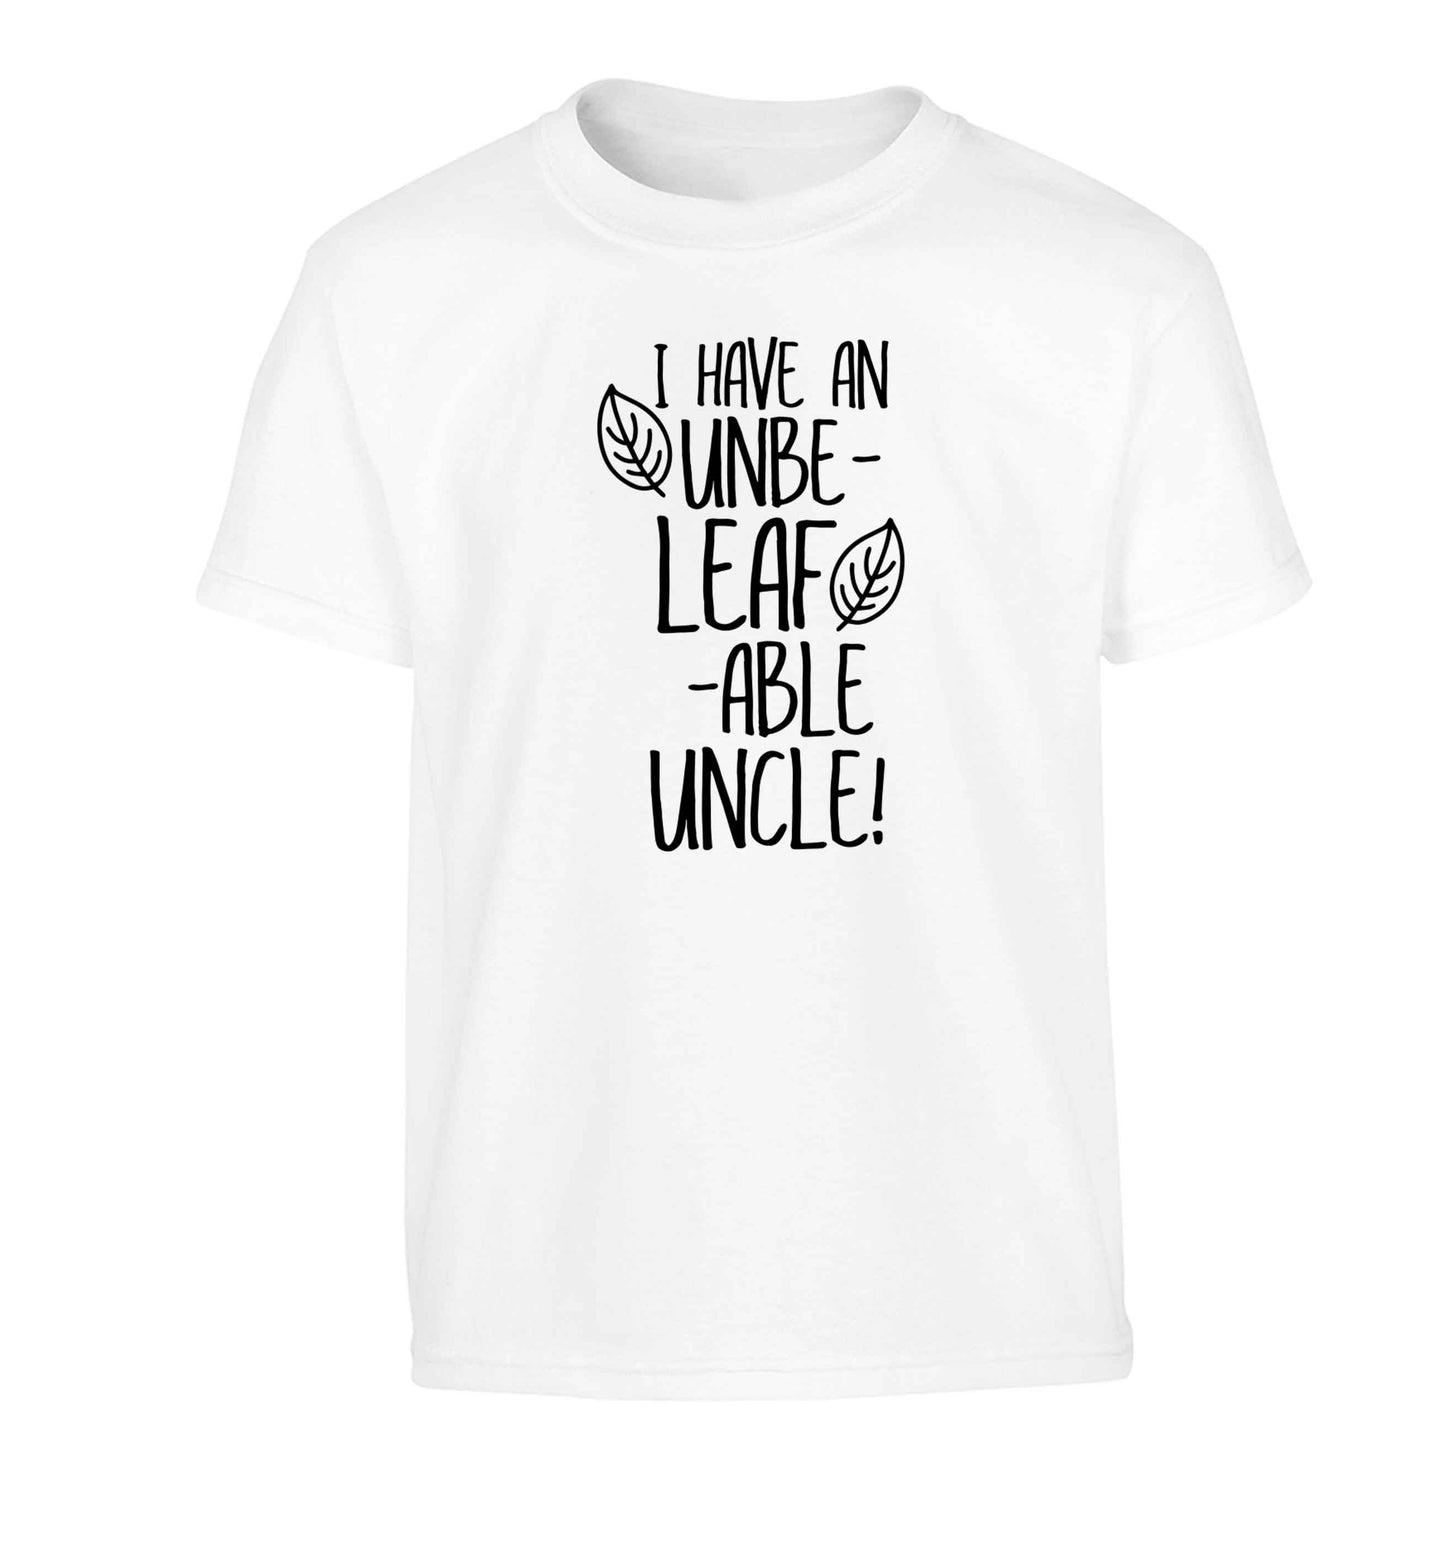 I have an unbe-leaf-able uncle Children's white Tshirt 12-13 Years